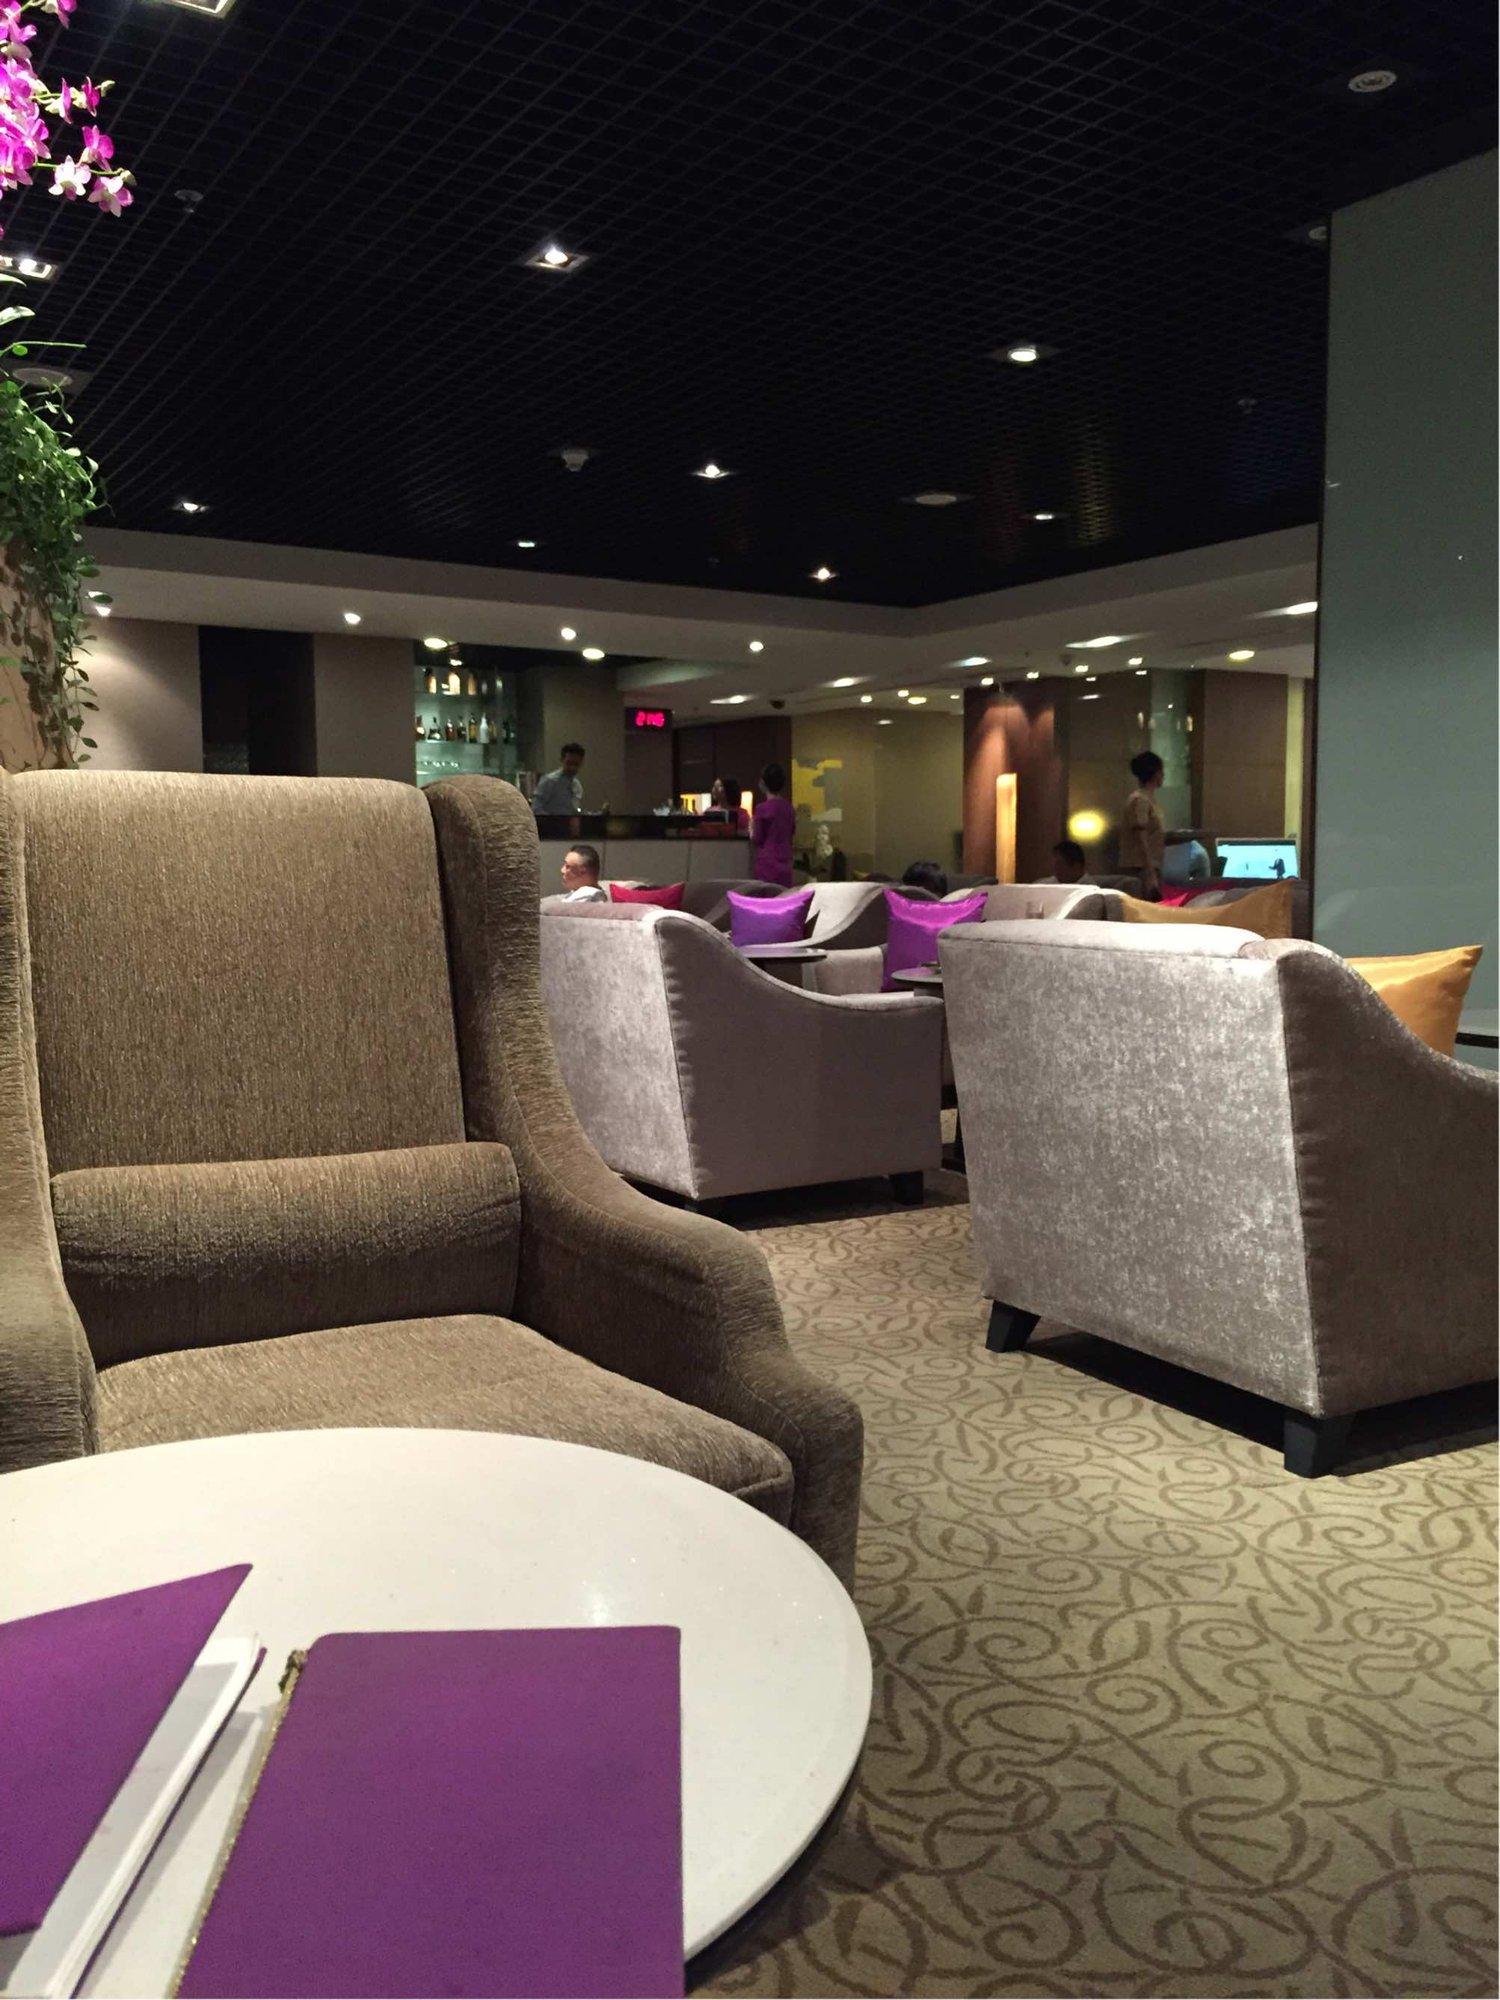 Thai Airways Royal First Class Lounge image 1 of 44